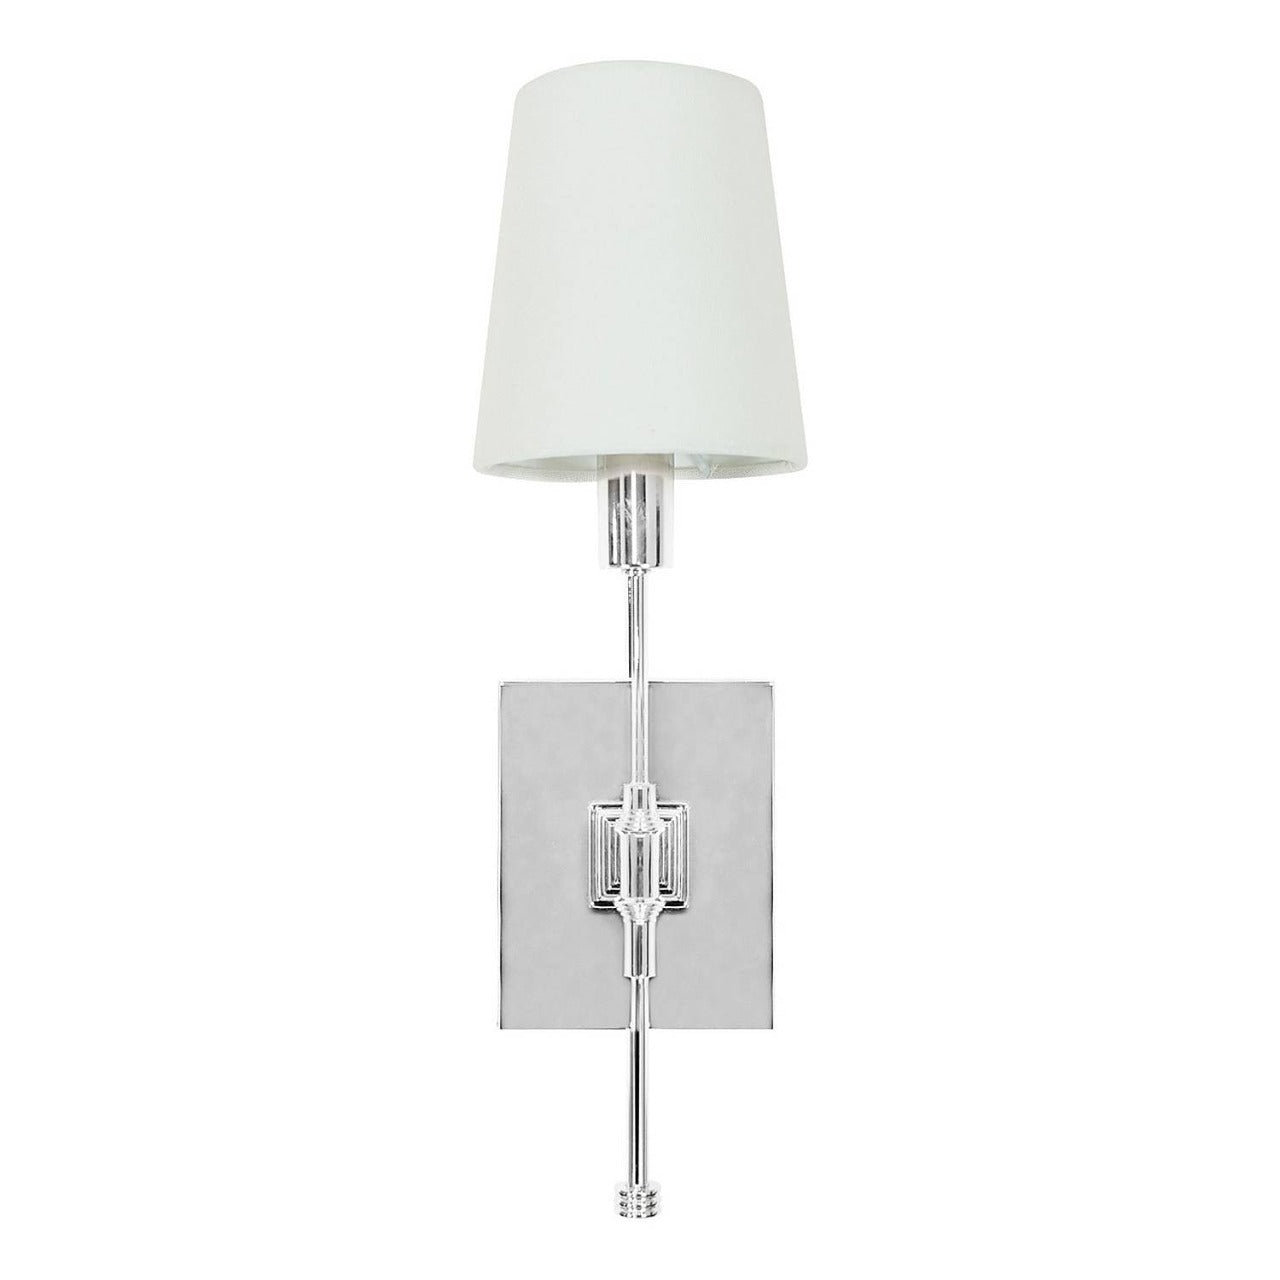 Mindy Brownes Glendan Wall Light - Silver  Mindy Brownes wall lamp. A traditional yet timeless wall lamp, smooth silver in finish with white linen shade. Ideal for hallways or built in cabinetry.